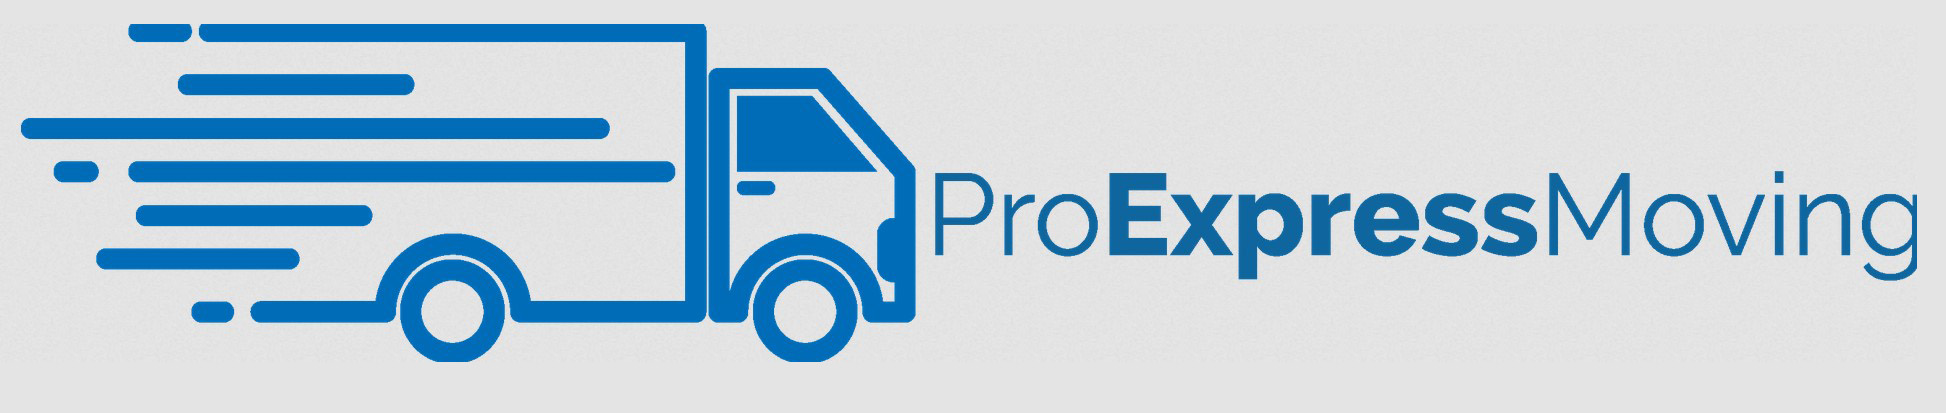 PRO EXPRESS MOVING